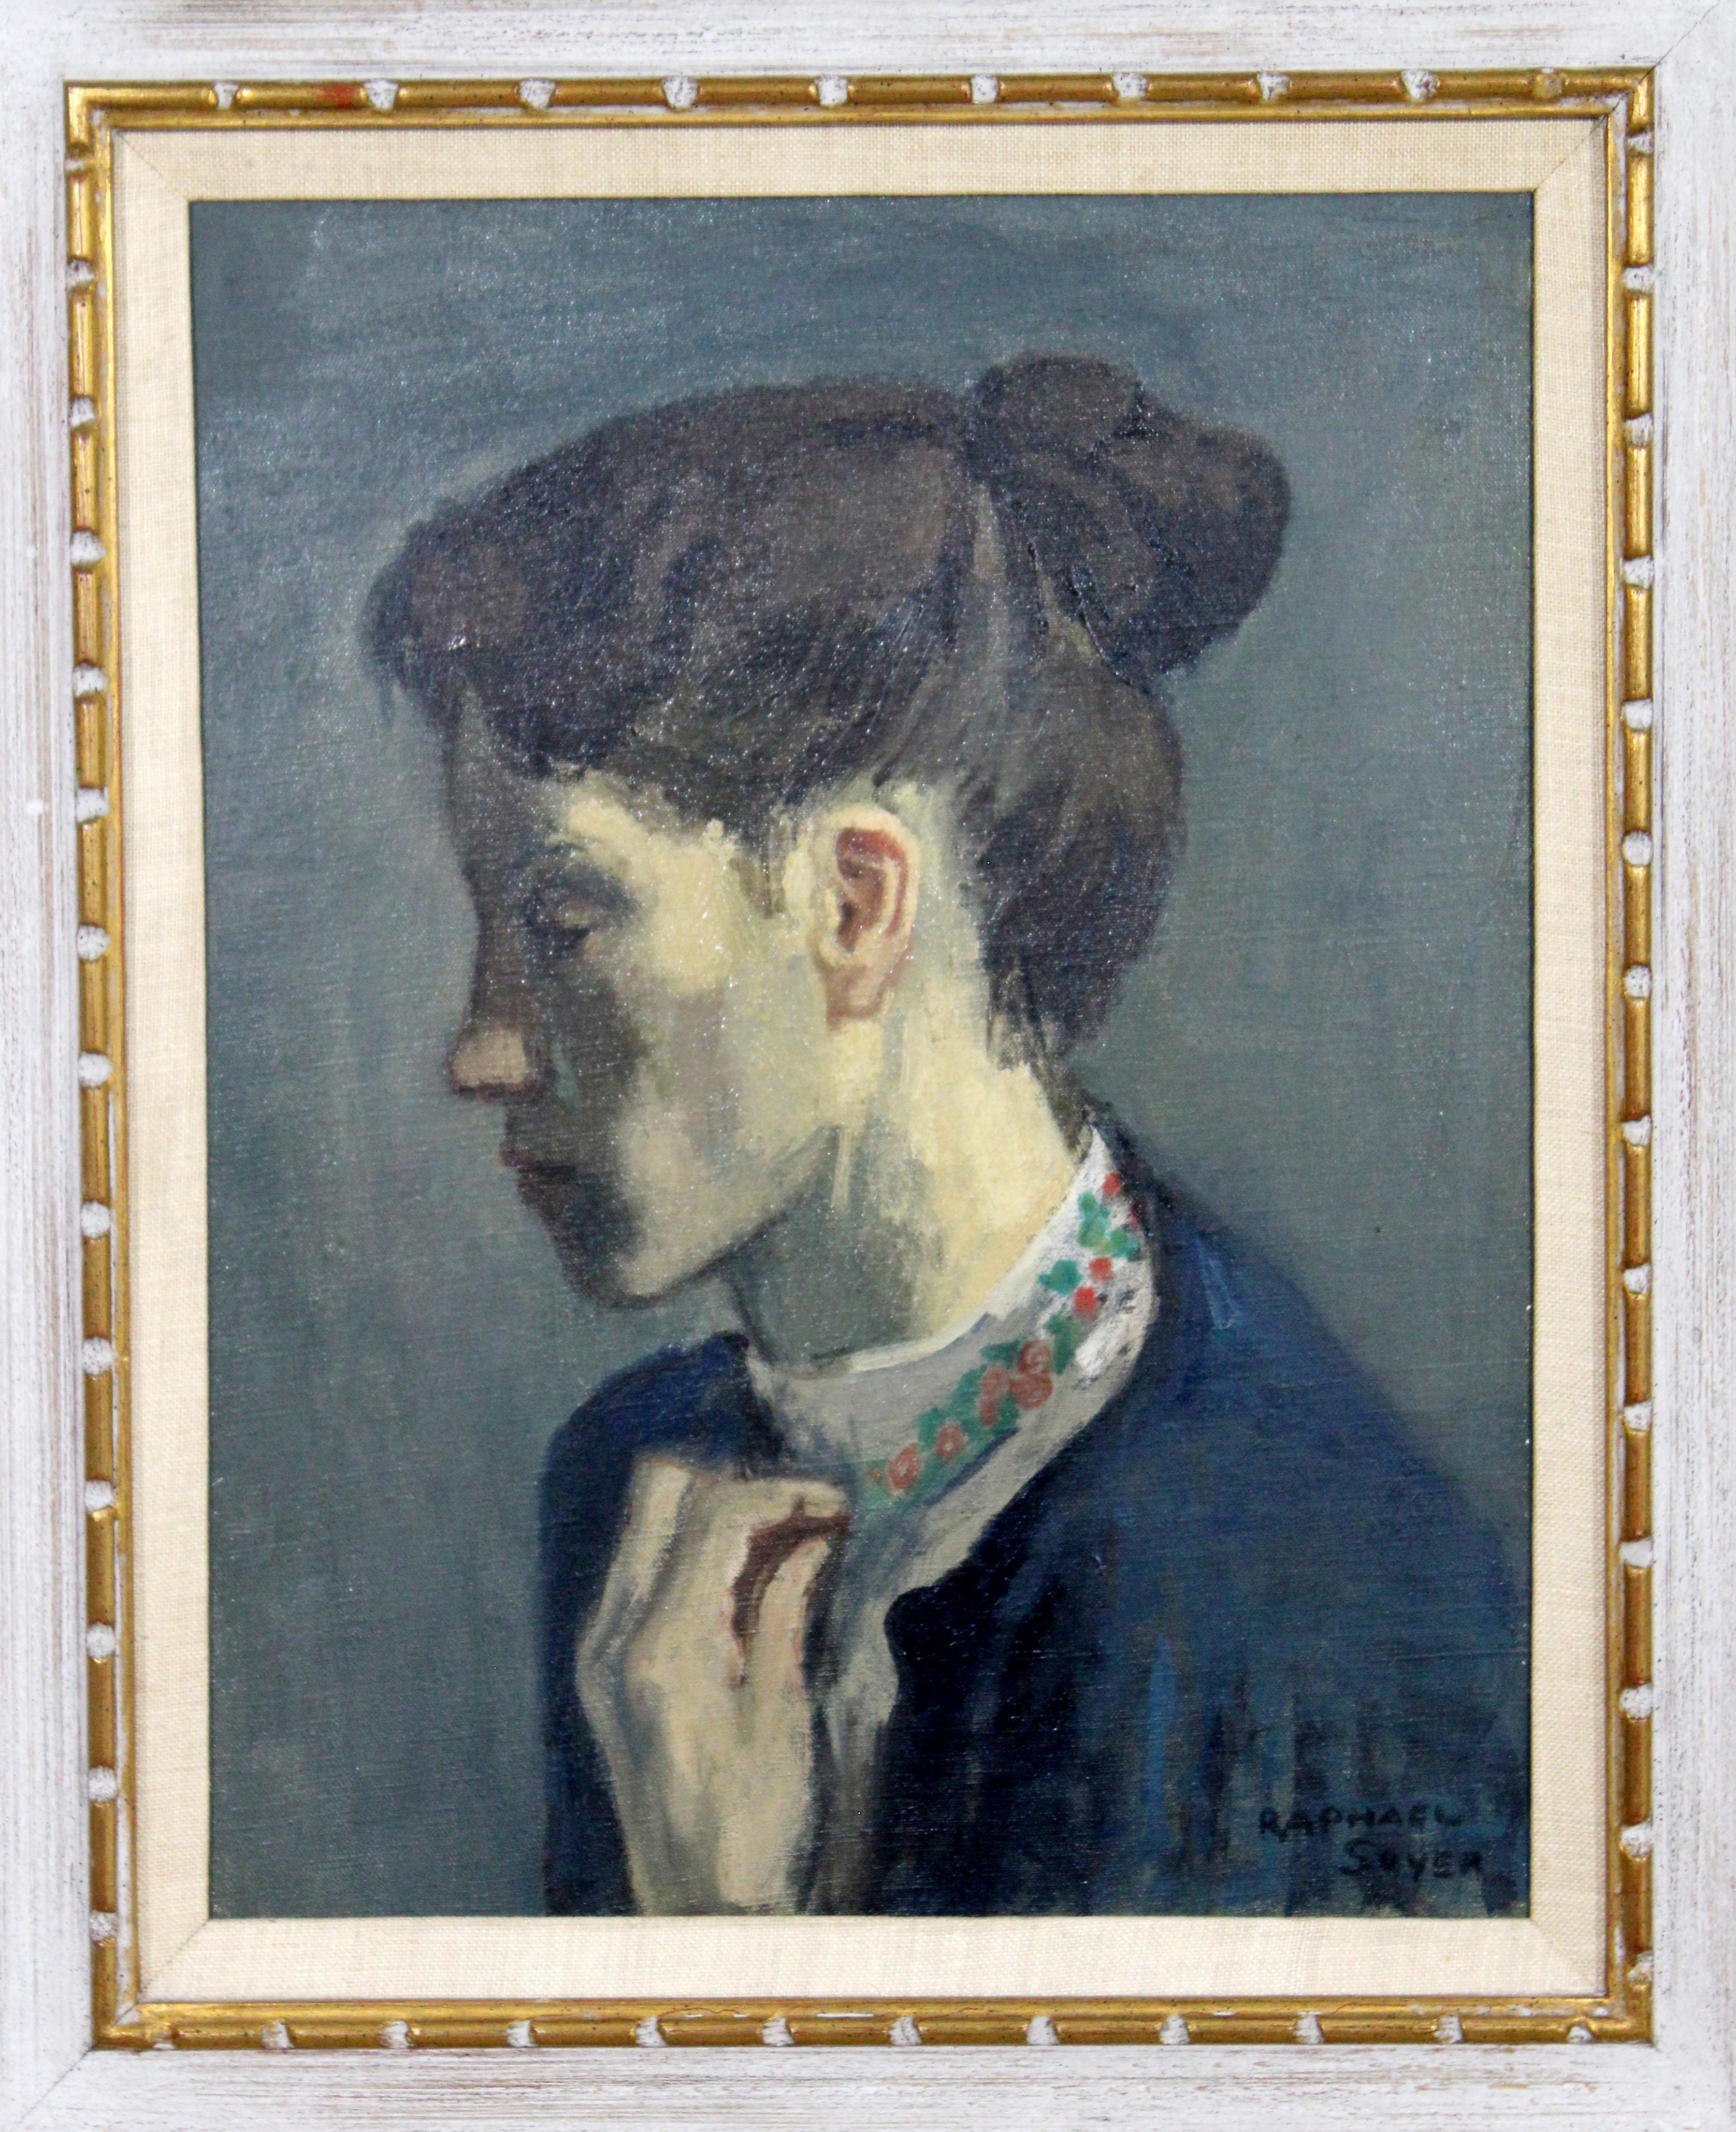 For your consideration is an emotional, framed portrait, done in oil on canvas, signed by Raphael Soyer. In excellent condition. The dimensions of the frame are 20.5